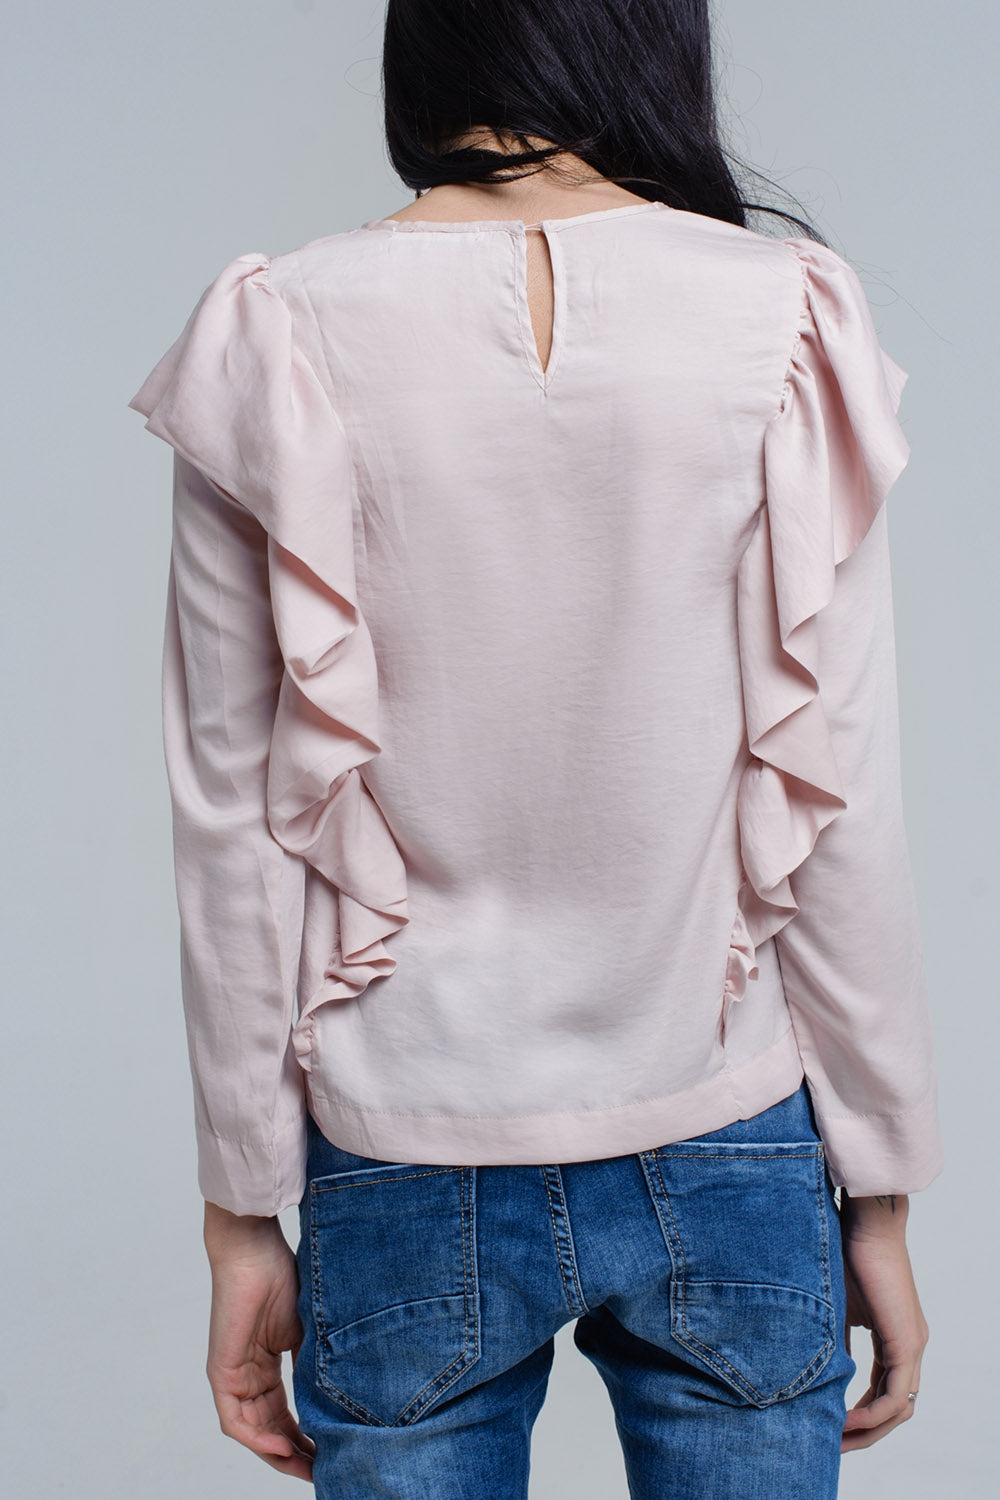 Top With Ruffle Detail in Pale Pink